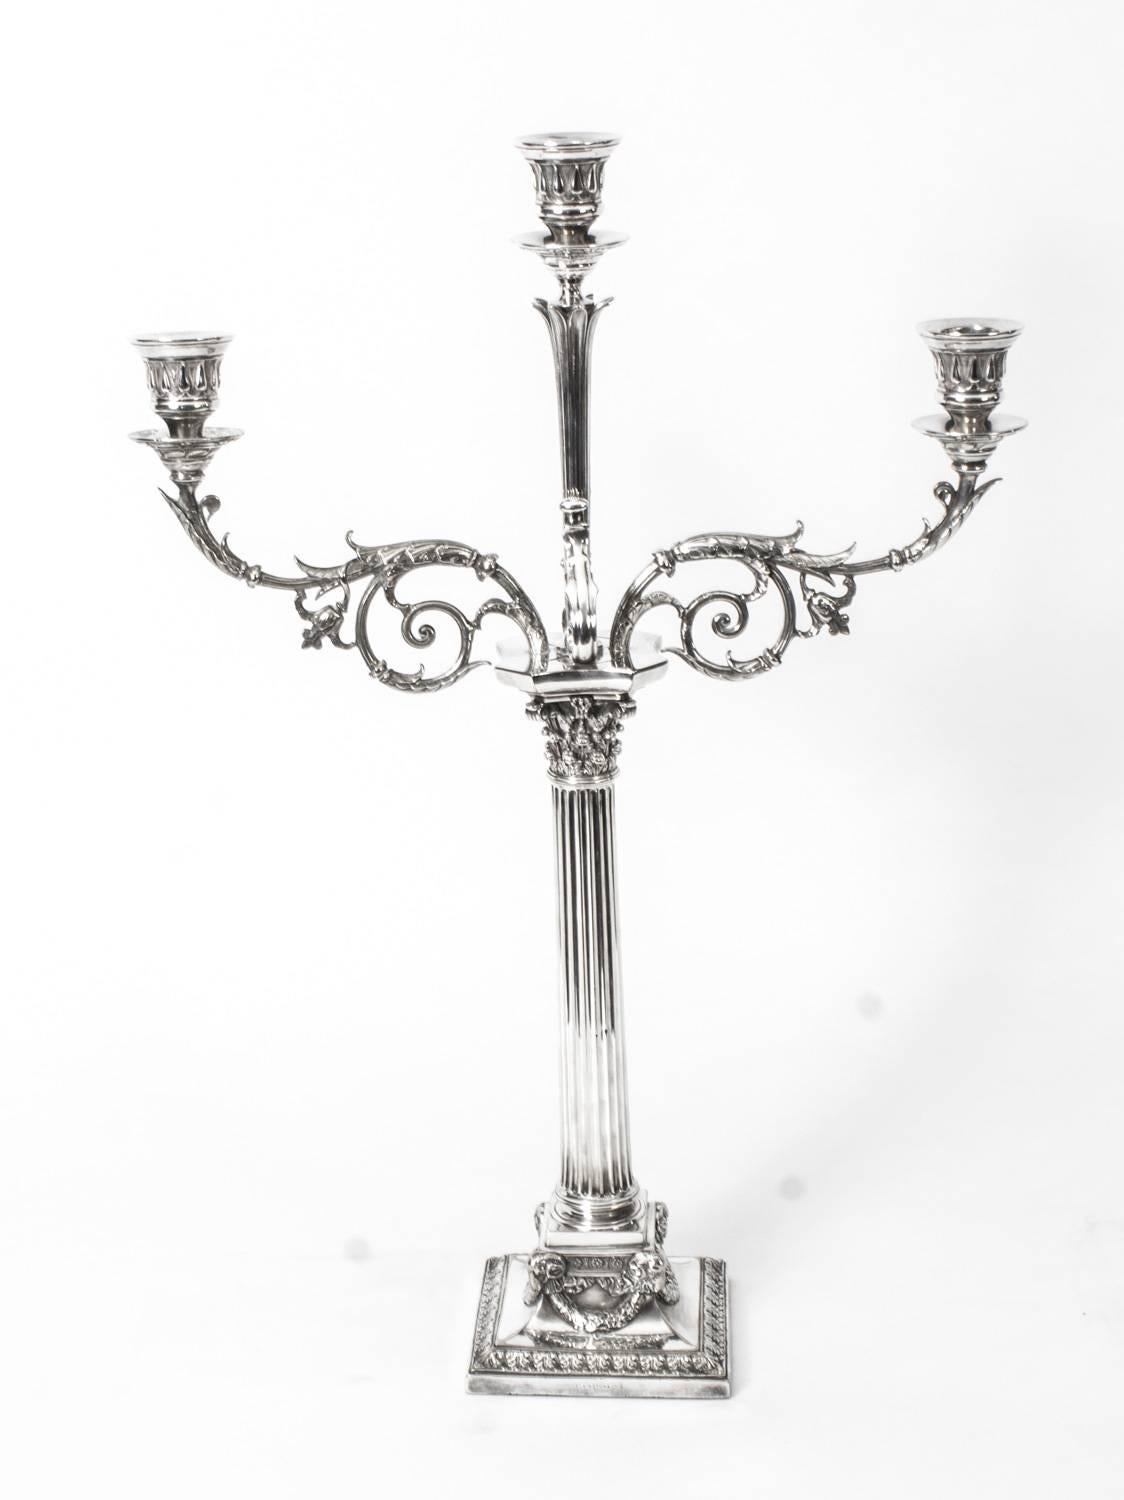 This is a stunning pair of antique Victorian silver plated, three light, two-branch table candelabra, circa 1865 in date, and each bearing the makers mark of the renowned English silversmiths Elkington & Co.

The candelabra each feature a Corinthian